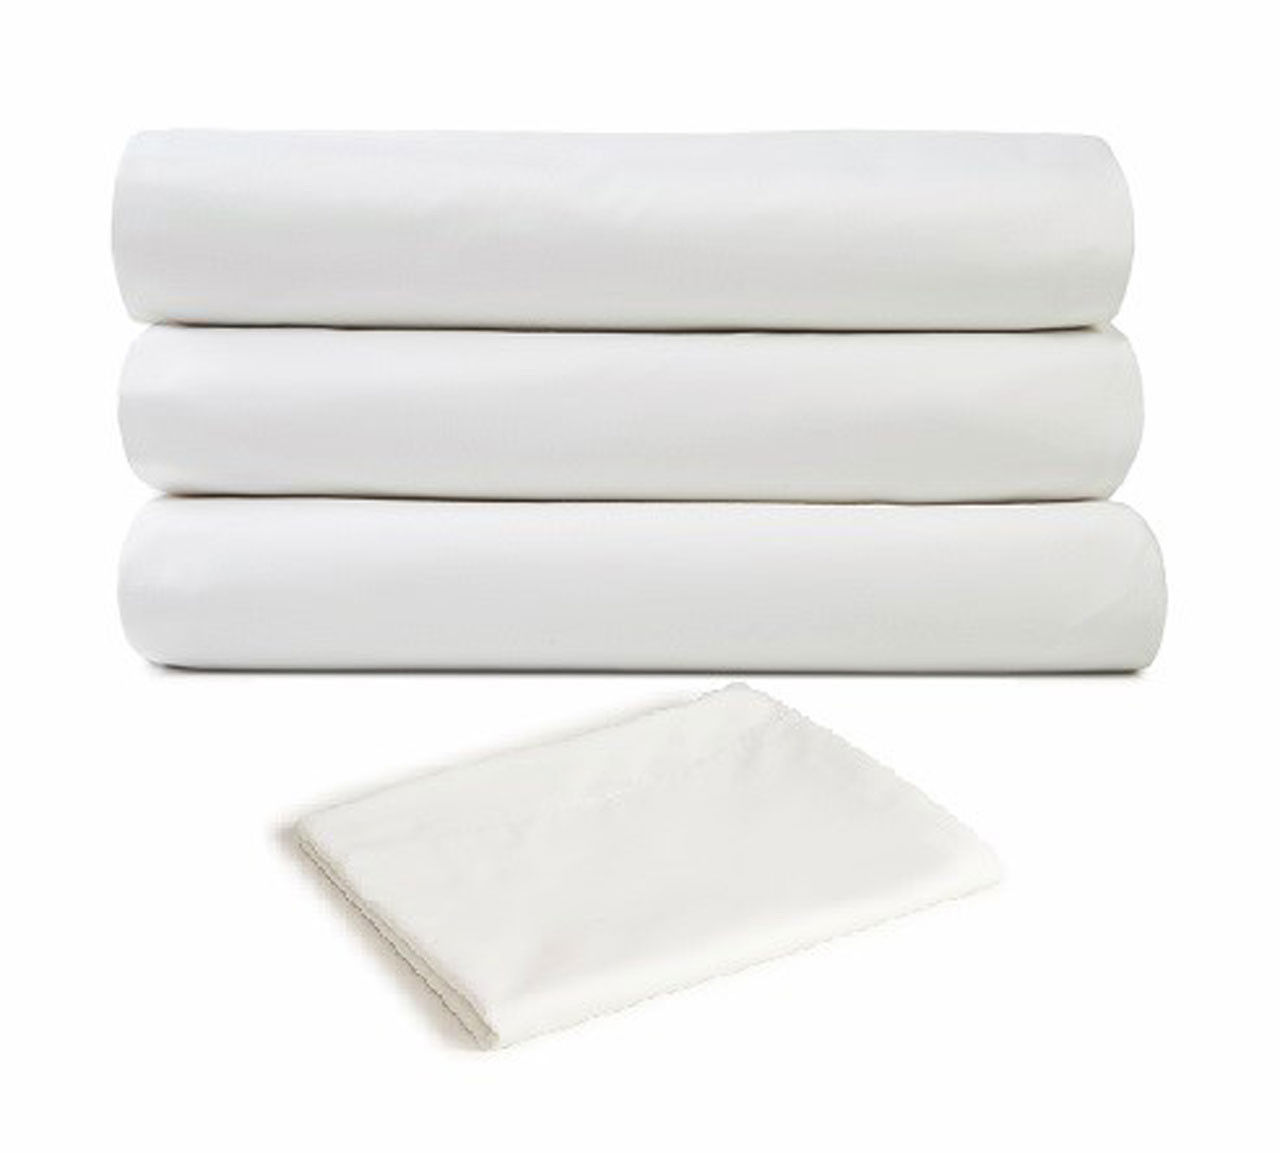 Is 60% cotton 40% polyester good sheets?